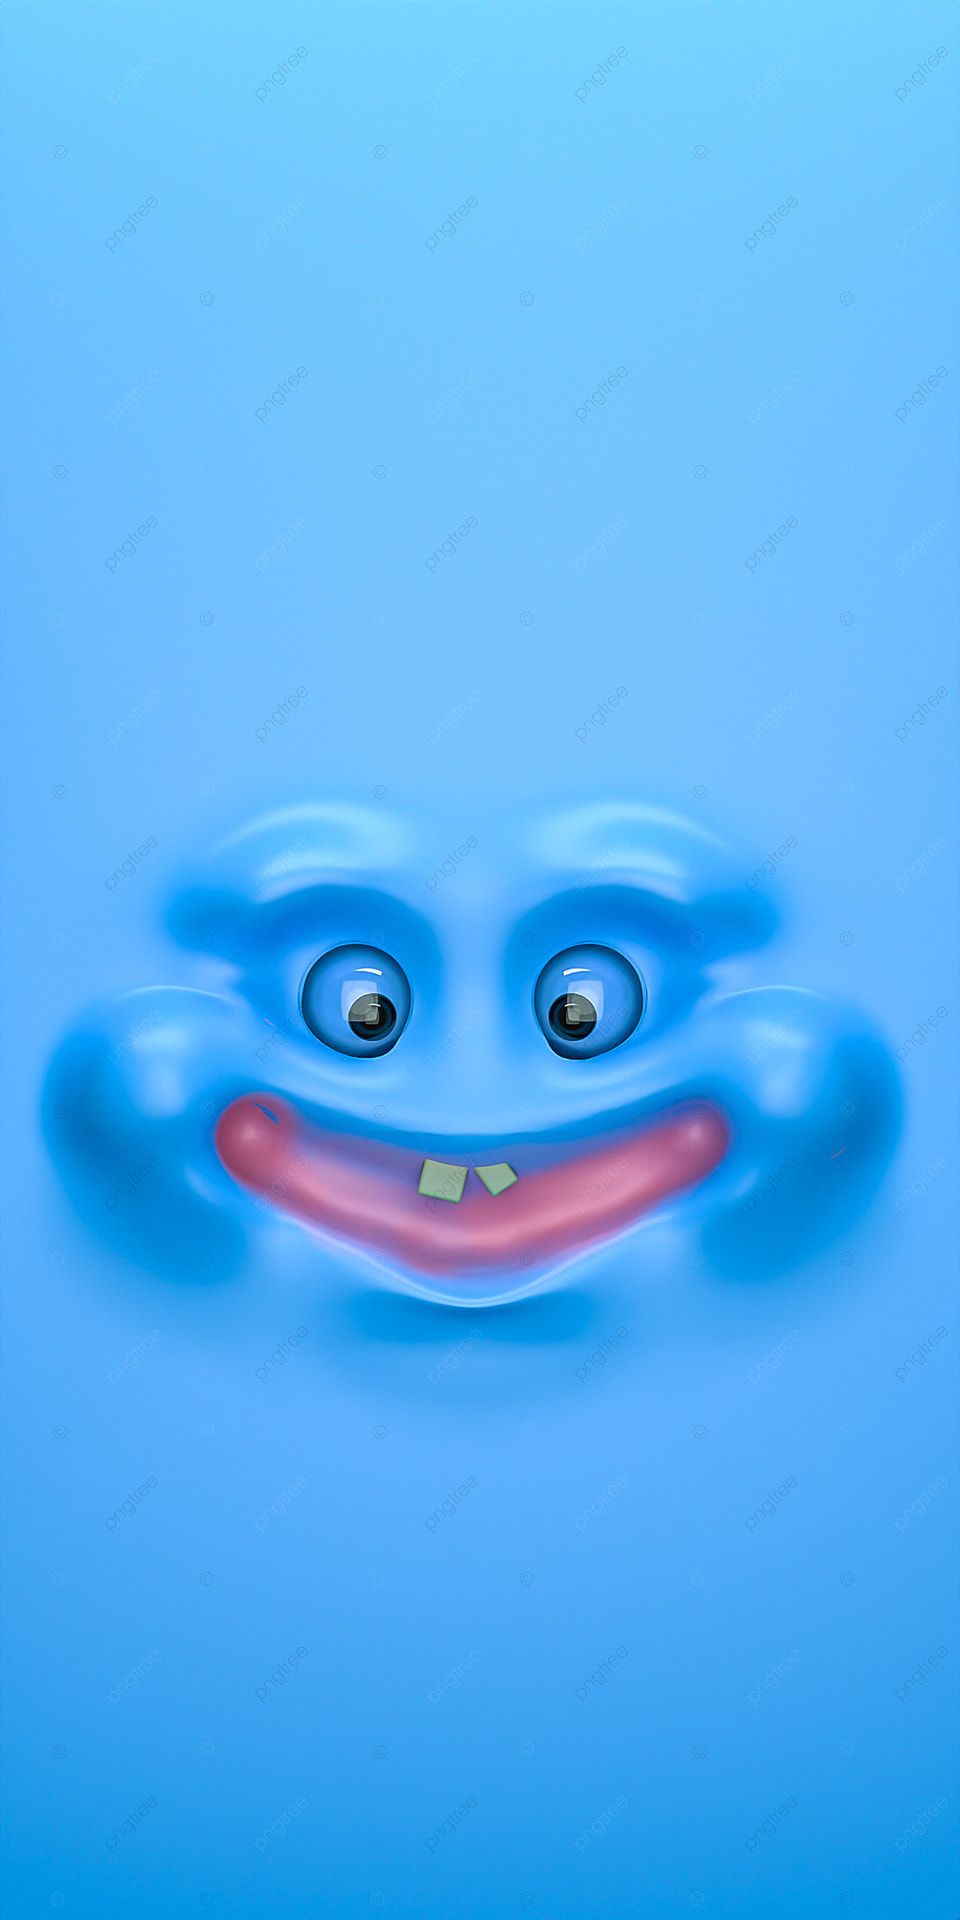 3D Blue Big Mouth Bacon Emoticon Expression Wallpaper, 3D, Phone Wallpaper, Cute Background Image for Free Download